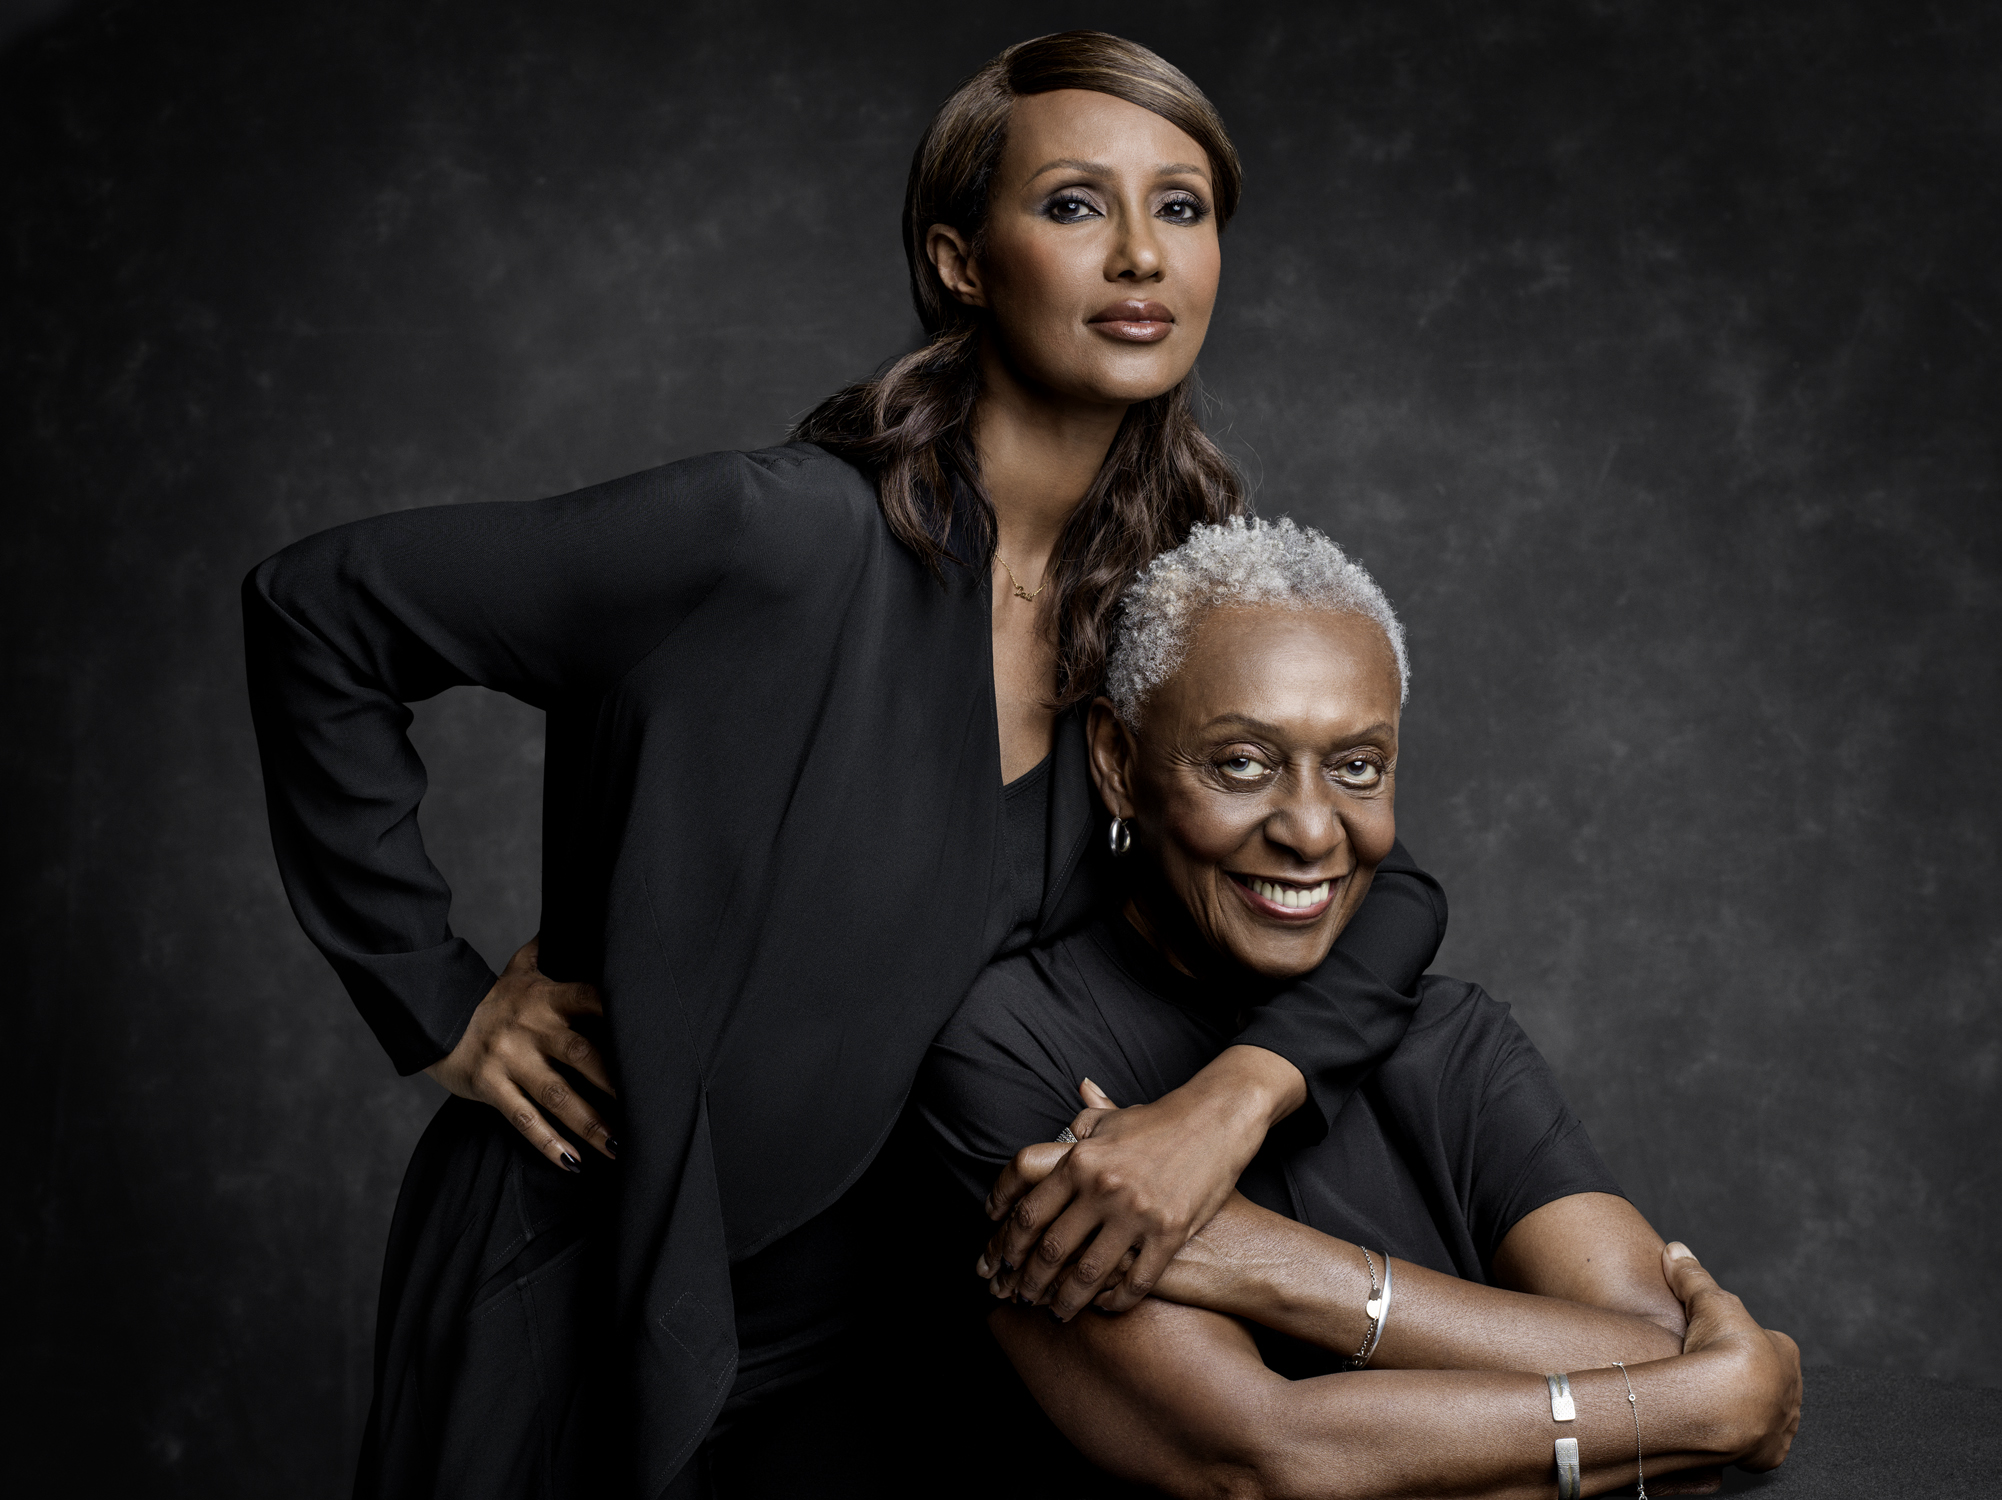 BH_2016_#ActuallySheCan with Iman by Inez and Vinoodh_1.jpg